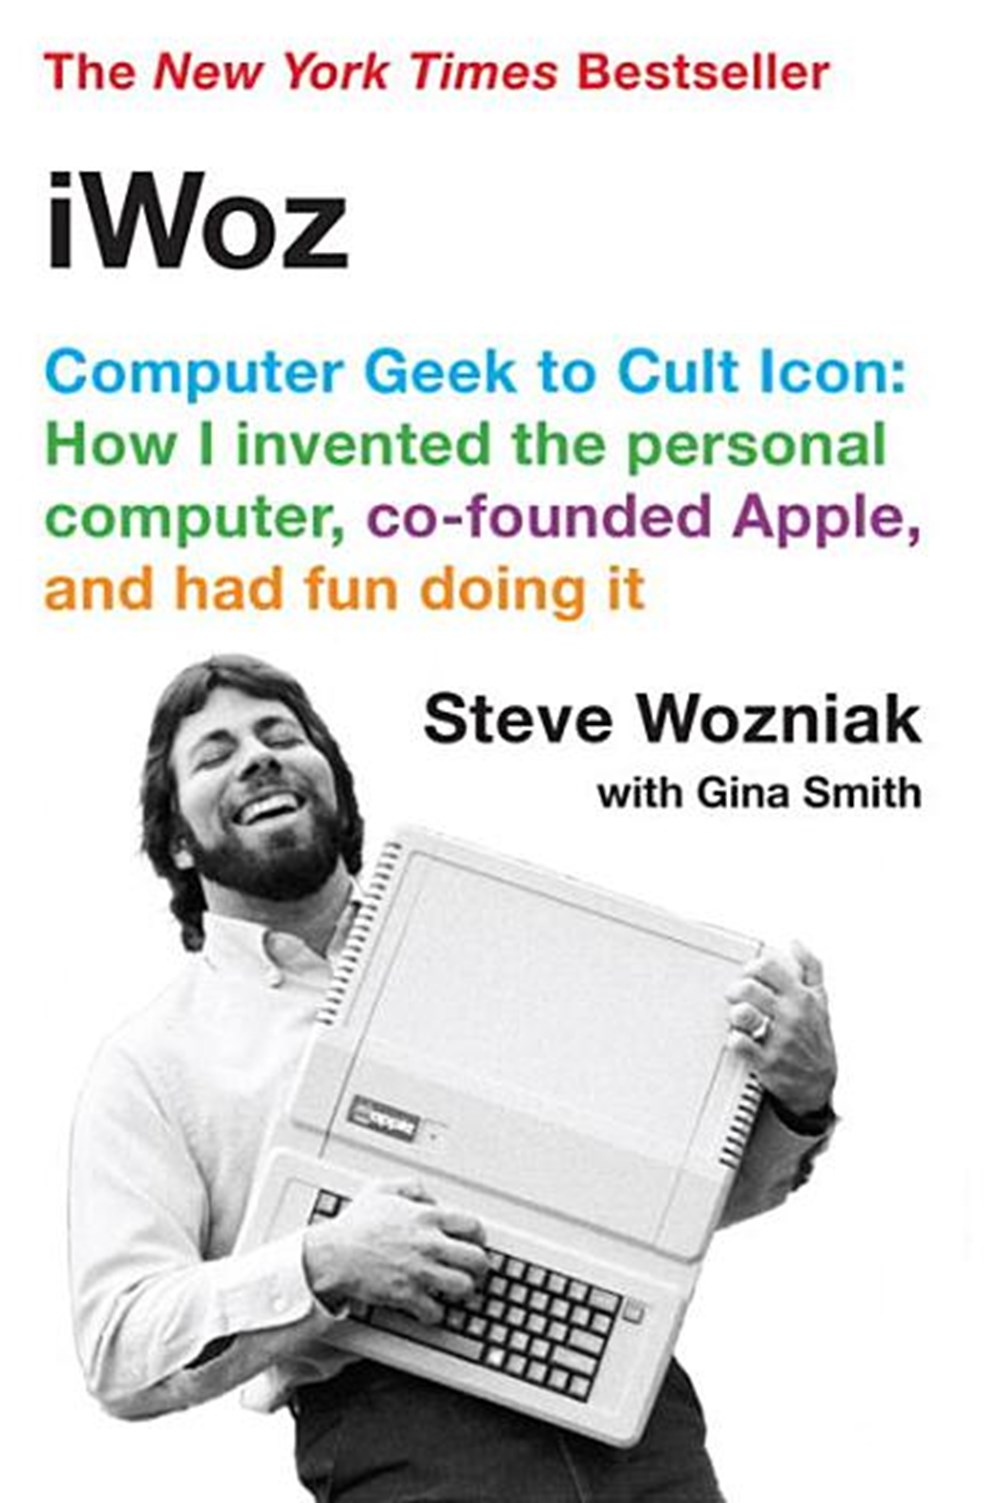 Iwoz Computer Geek to Cult Icon